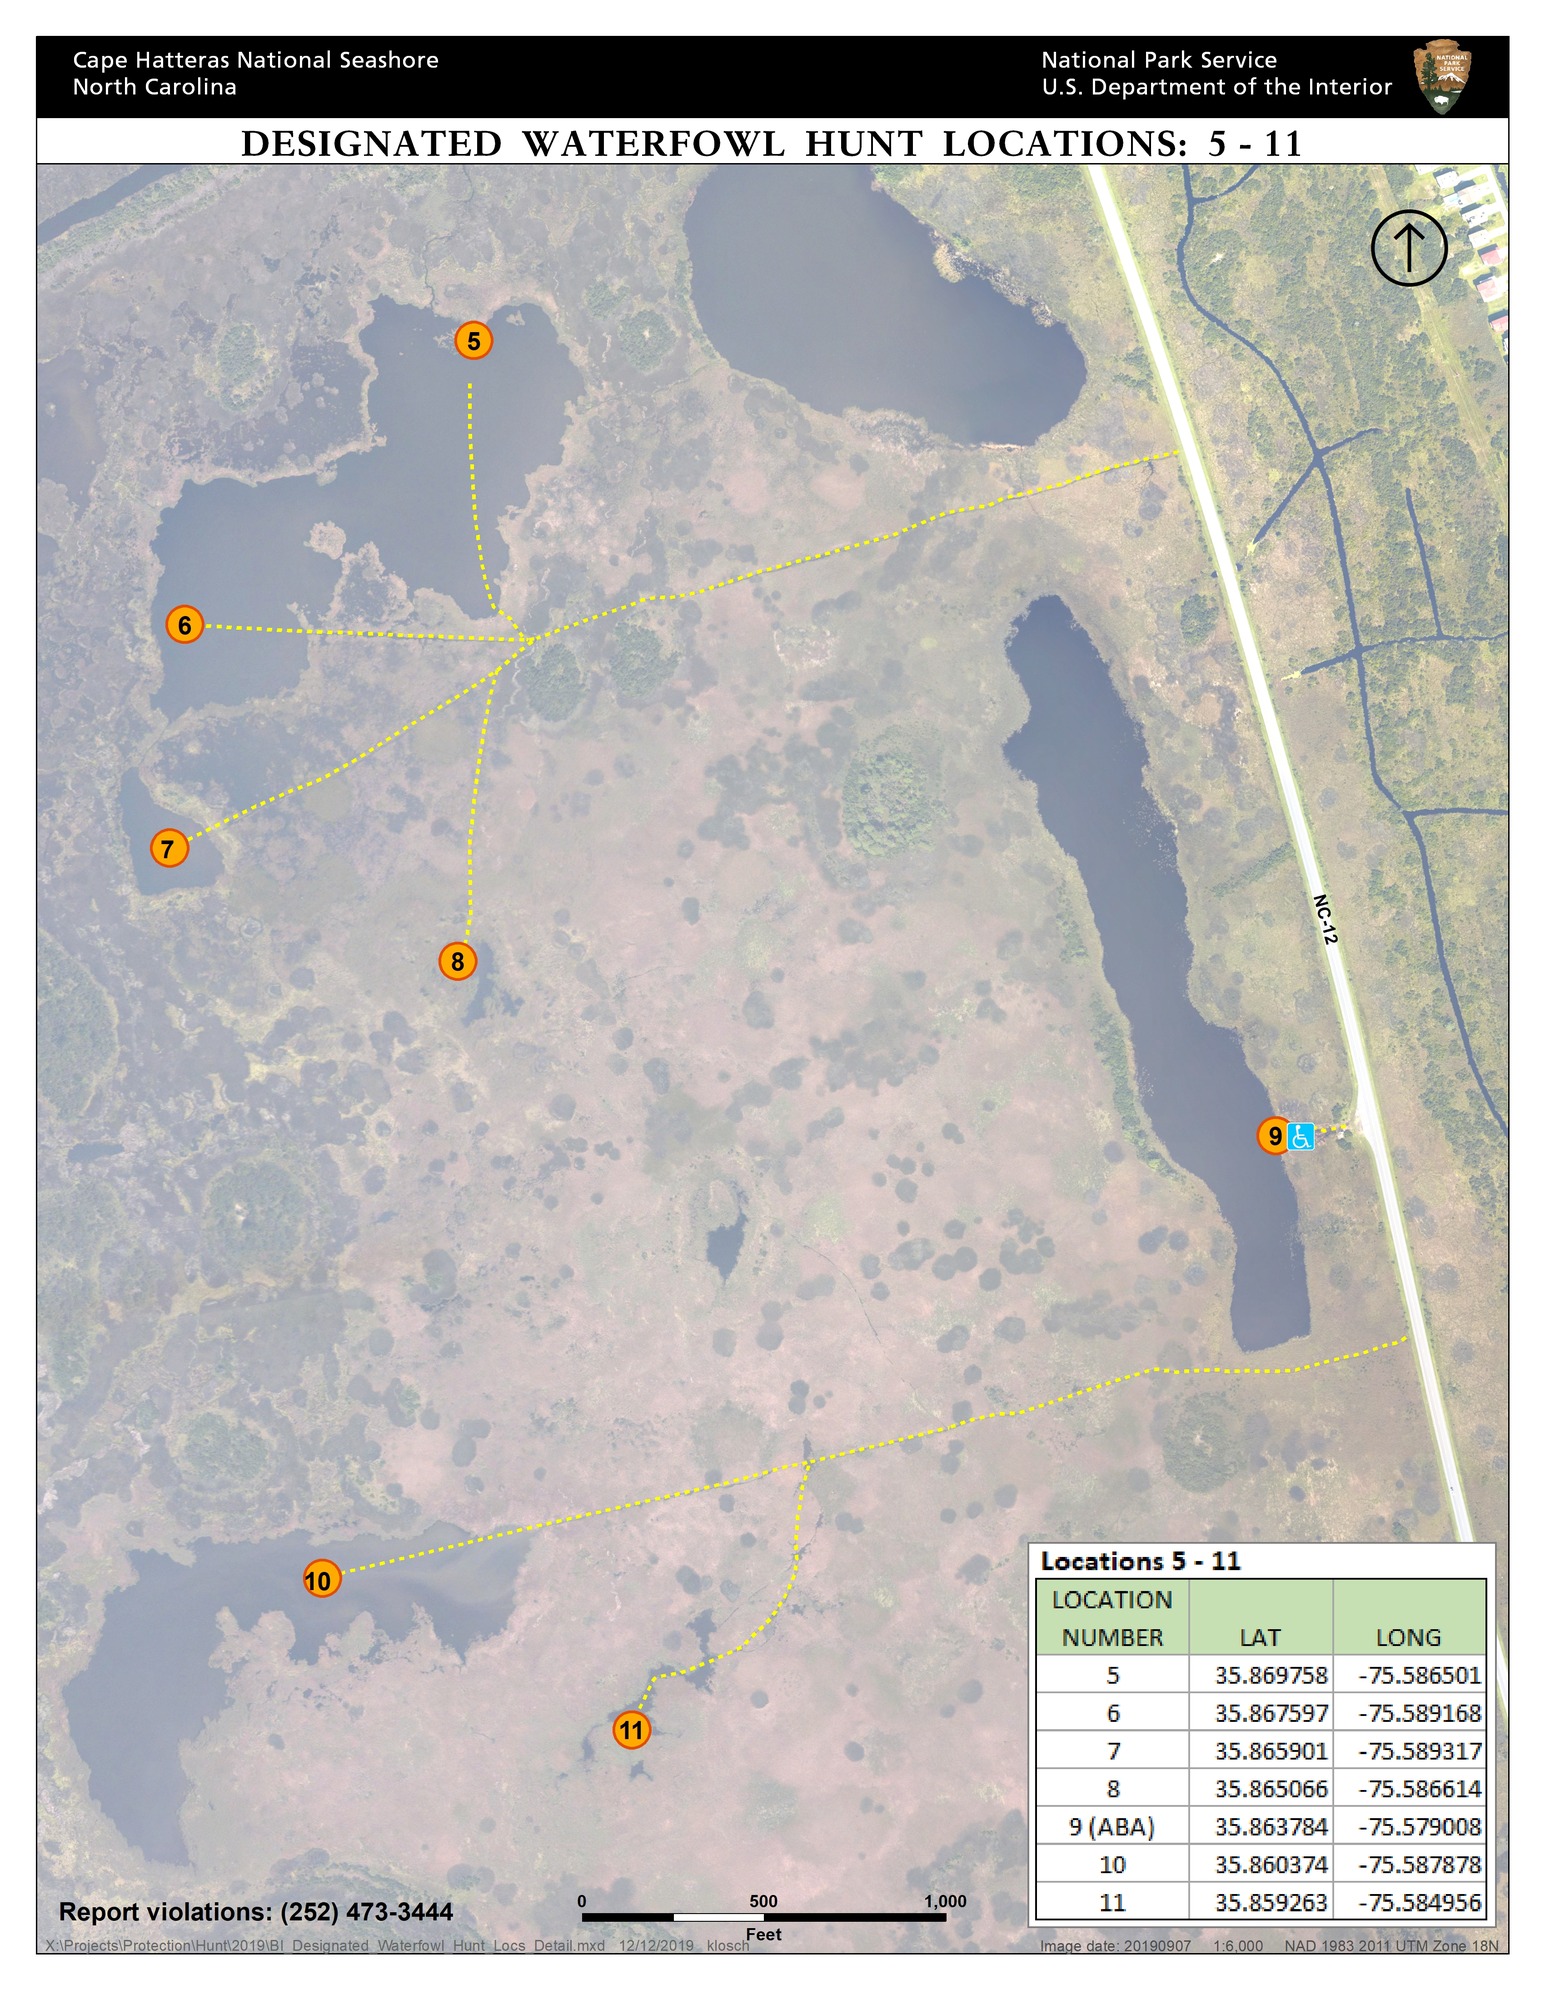 Location map of Bodie Island waterfowl hunt areas 5-11.